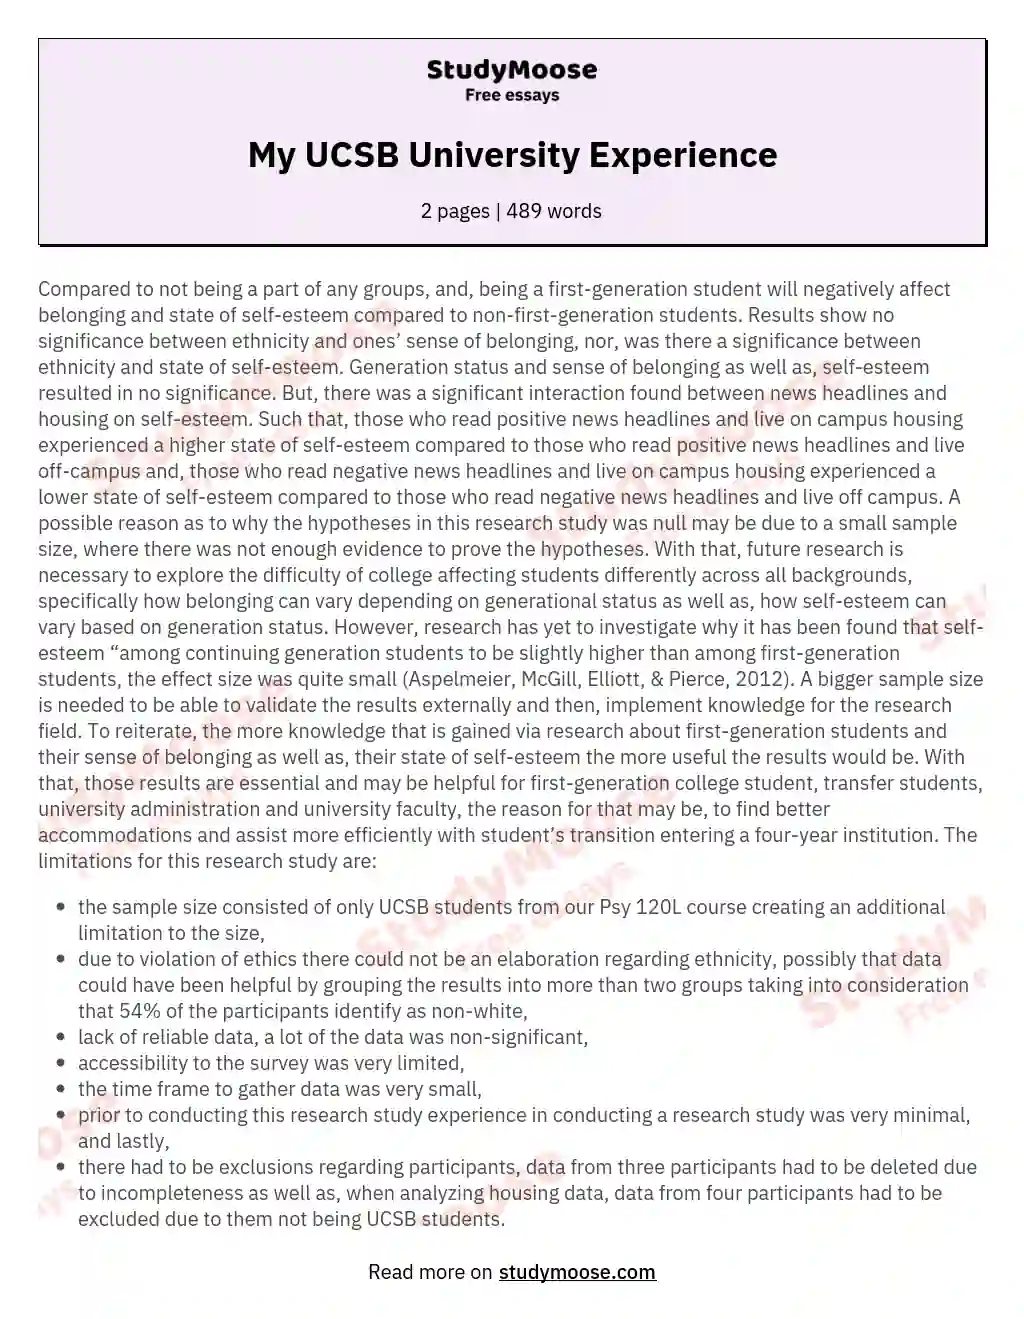 my first year university experience essay pdf free download